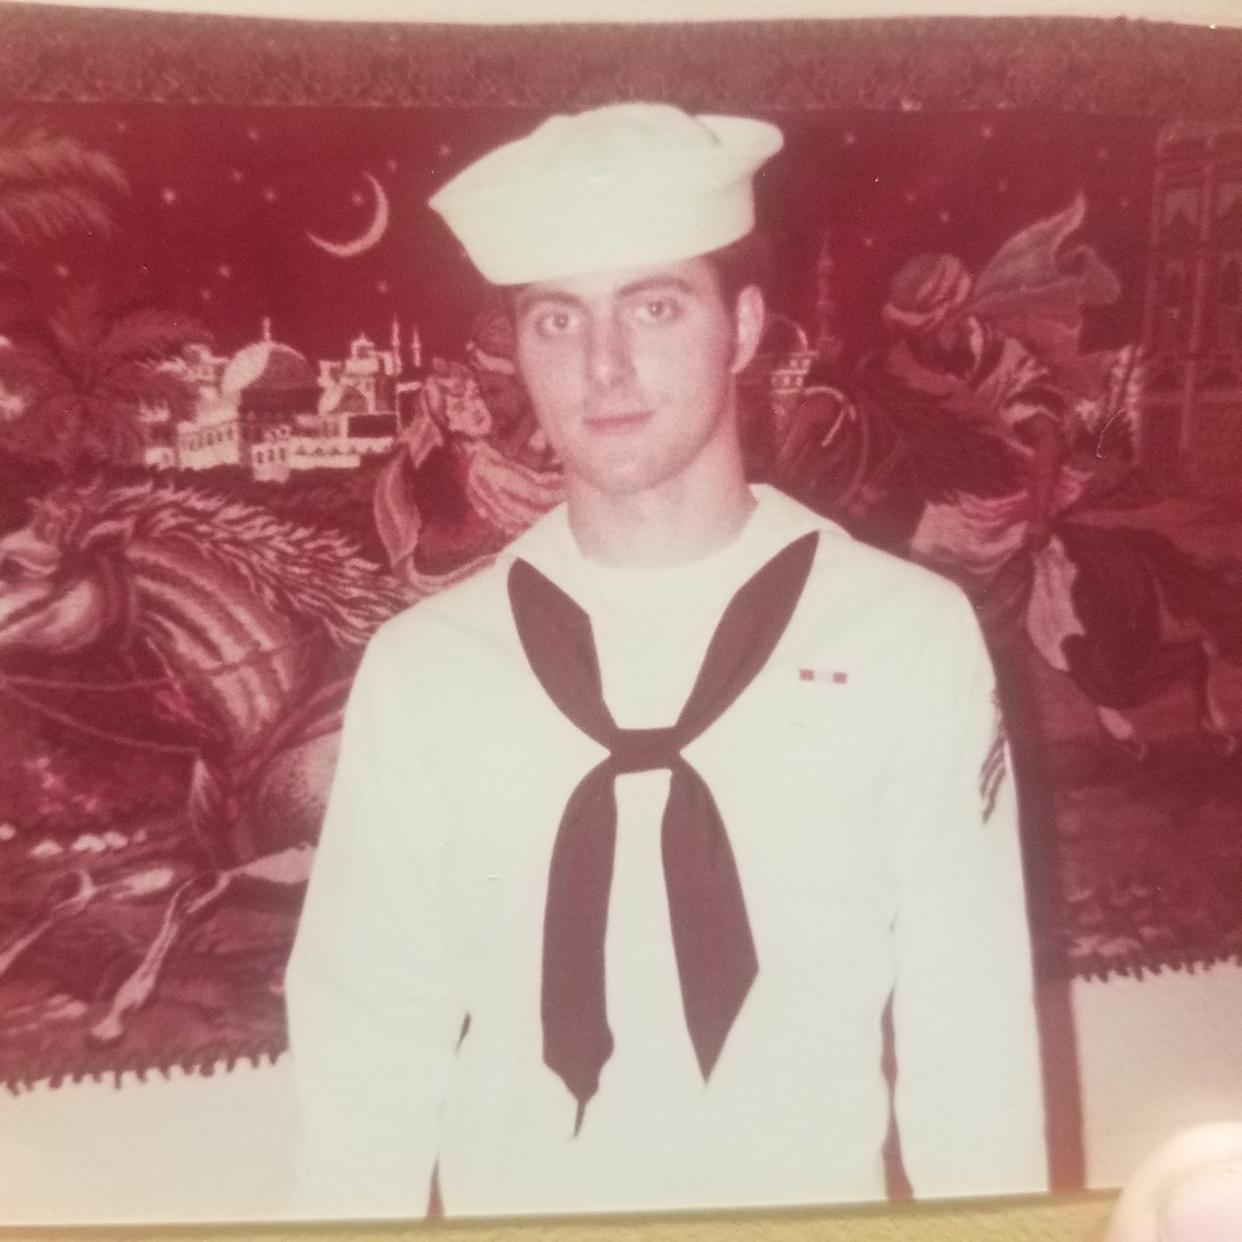 Tallahassee resident Mark Holt during his time as a submariner in the Navy about the USS Nautilus nuclear submarine.